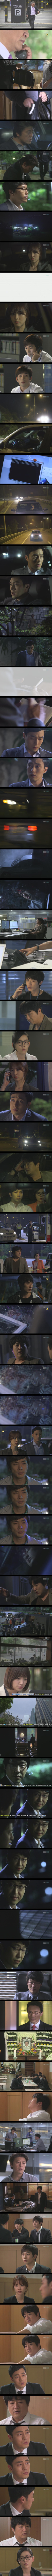 episodes 11 and 12 captures for the Korean drama 'Ghost - Drama'